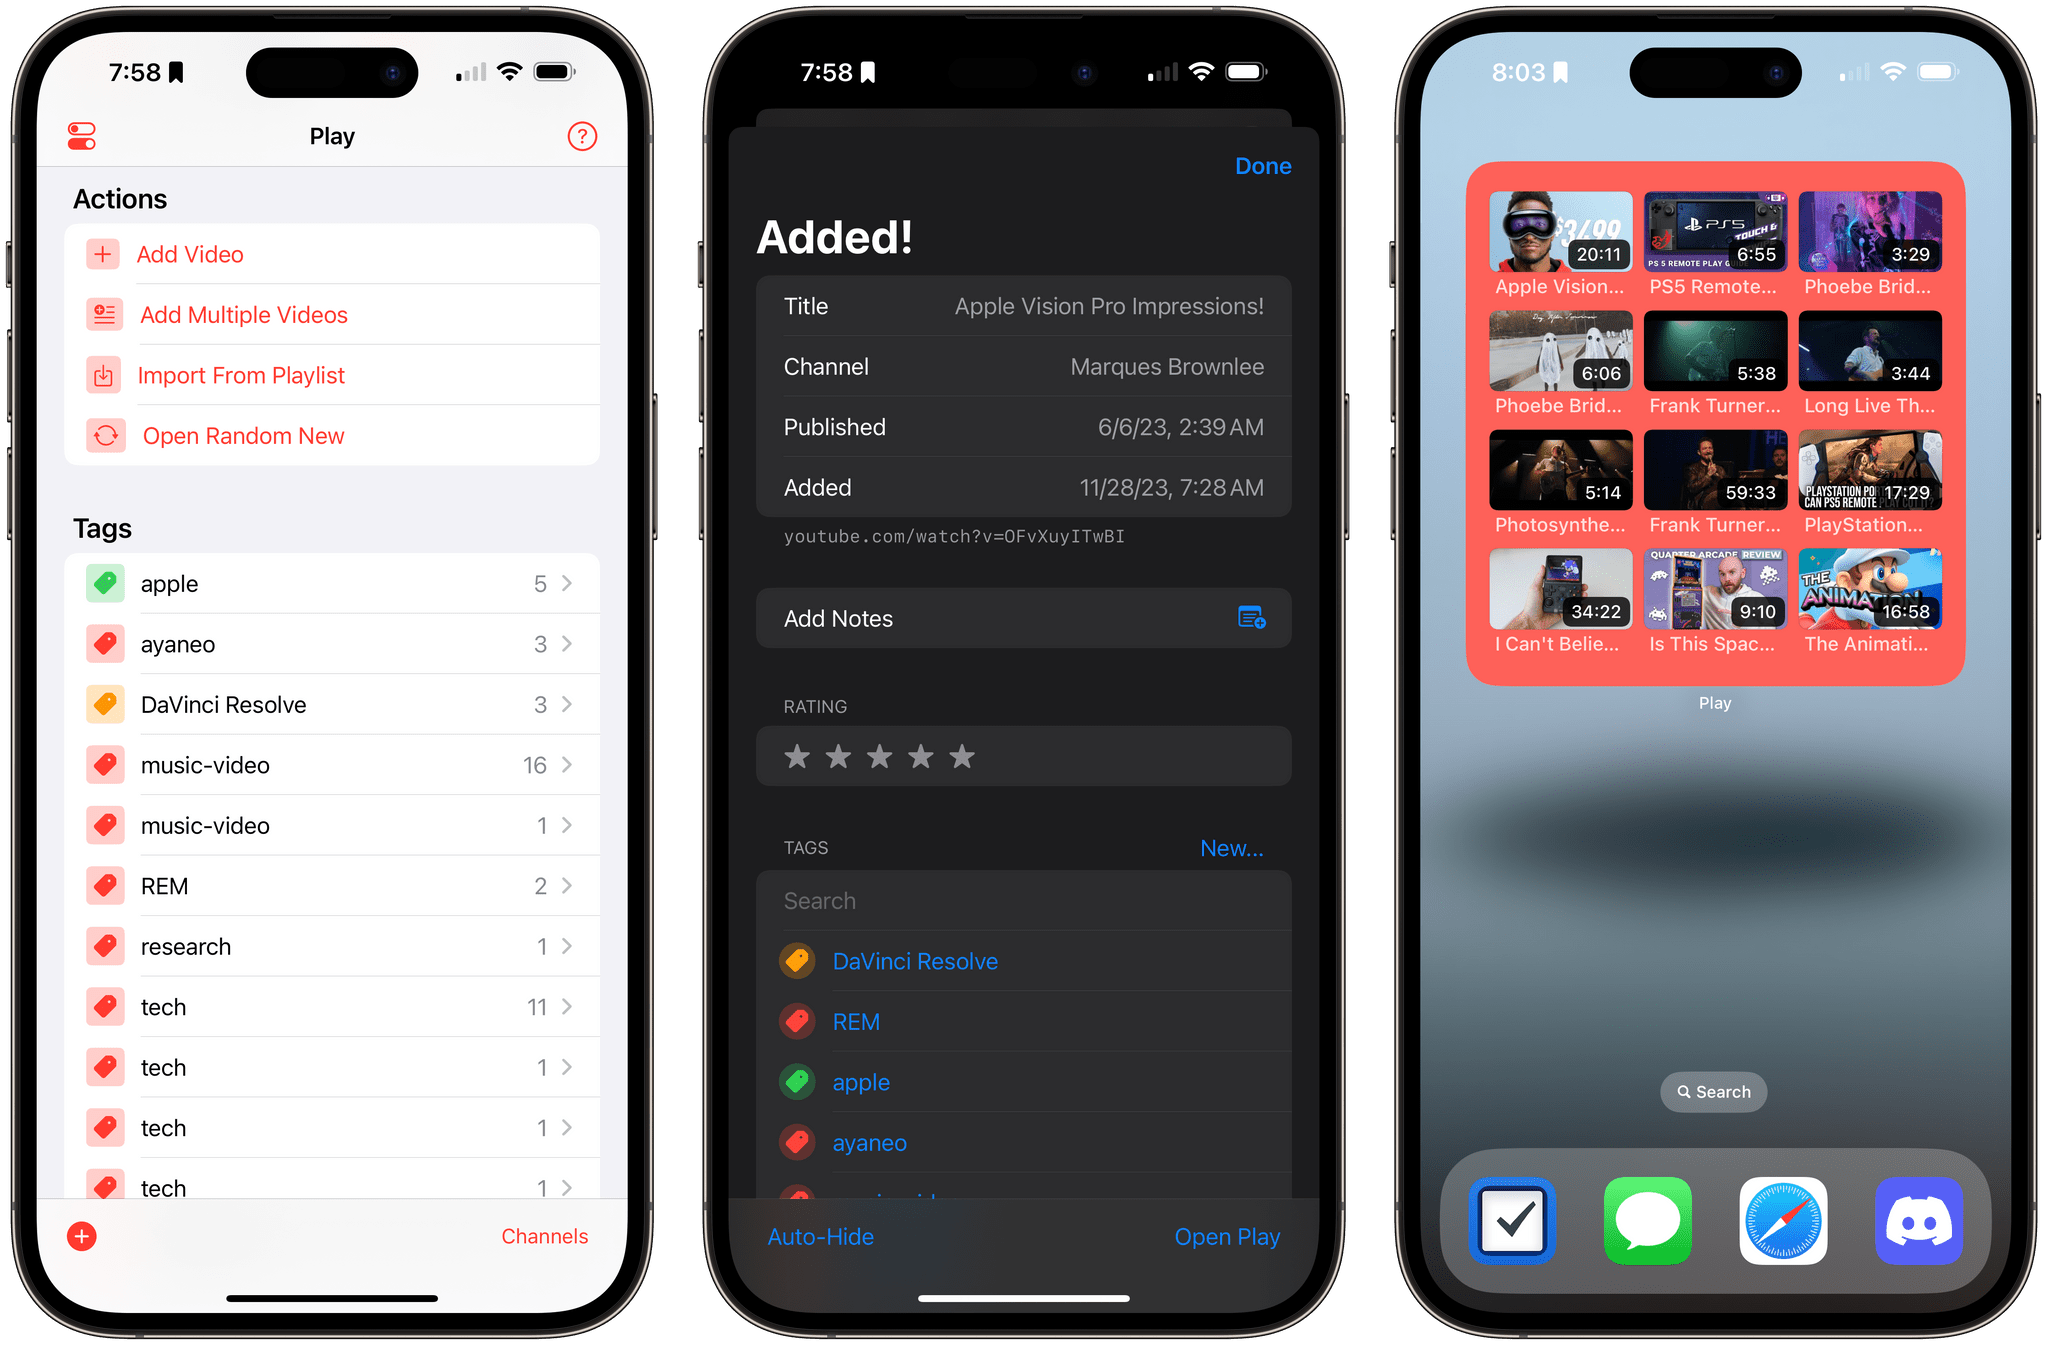 Play 2.0 also adds a button to play a random video, the ability to jump into the app from the share sheet, and more videos in the large Home Screen widget.